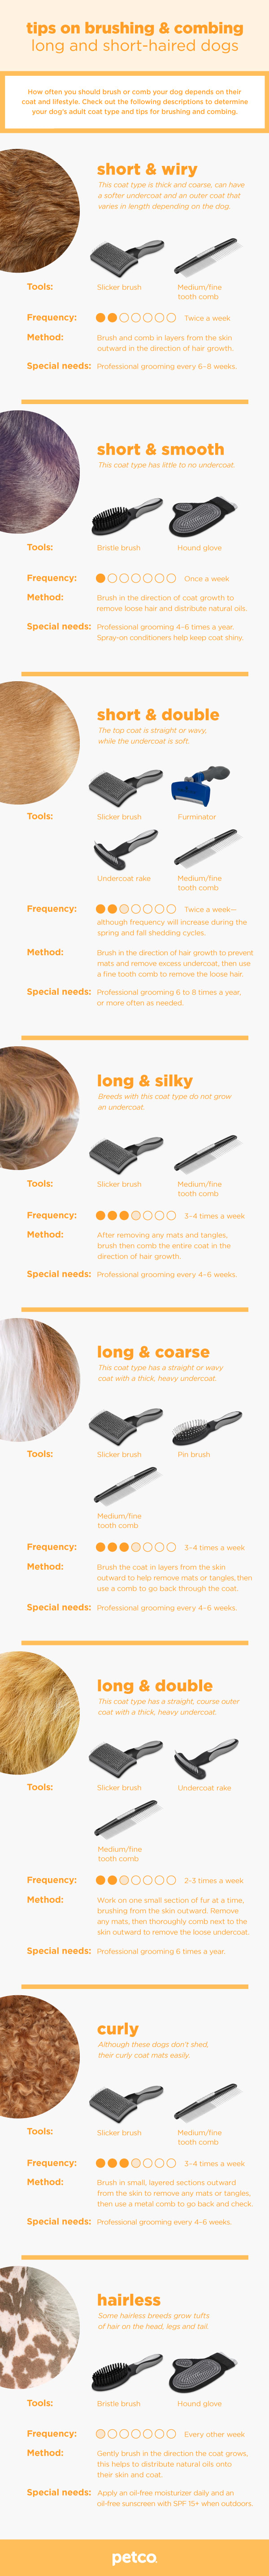 Find the right brush for your pet's fur